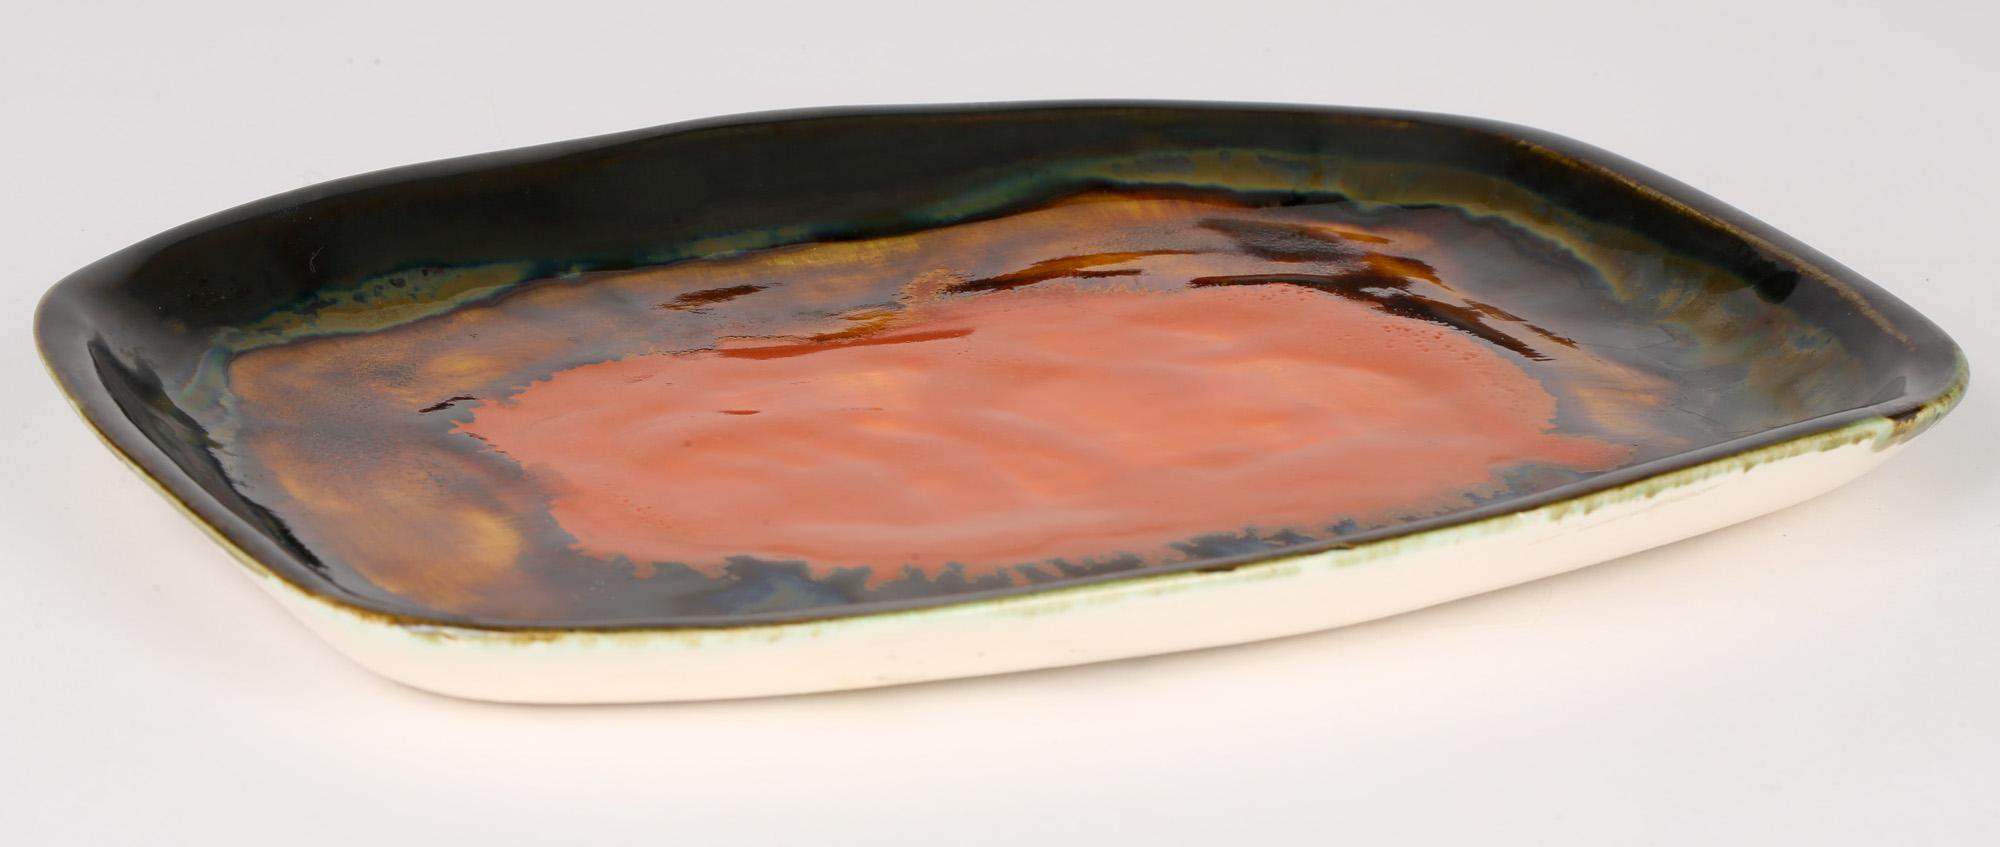 Eric Leaper Newlyn Studio Pottery Orange Glazed Tray or Shallow Dish In Good Condition For Sale In Bishop's Stortford, Hertfordshire